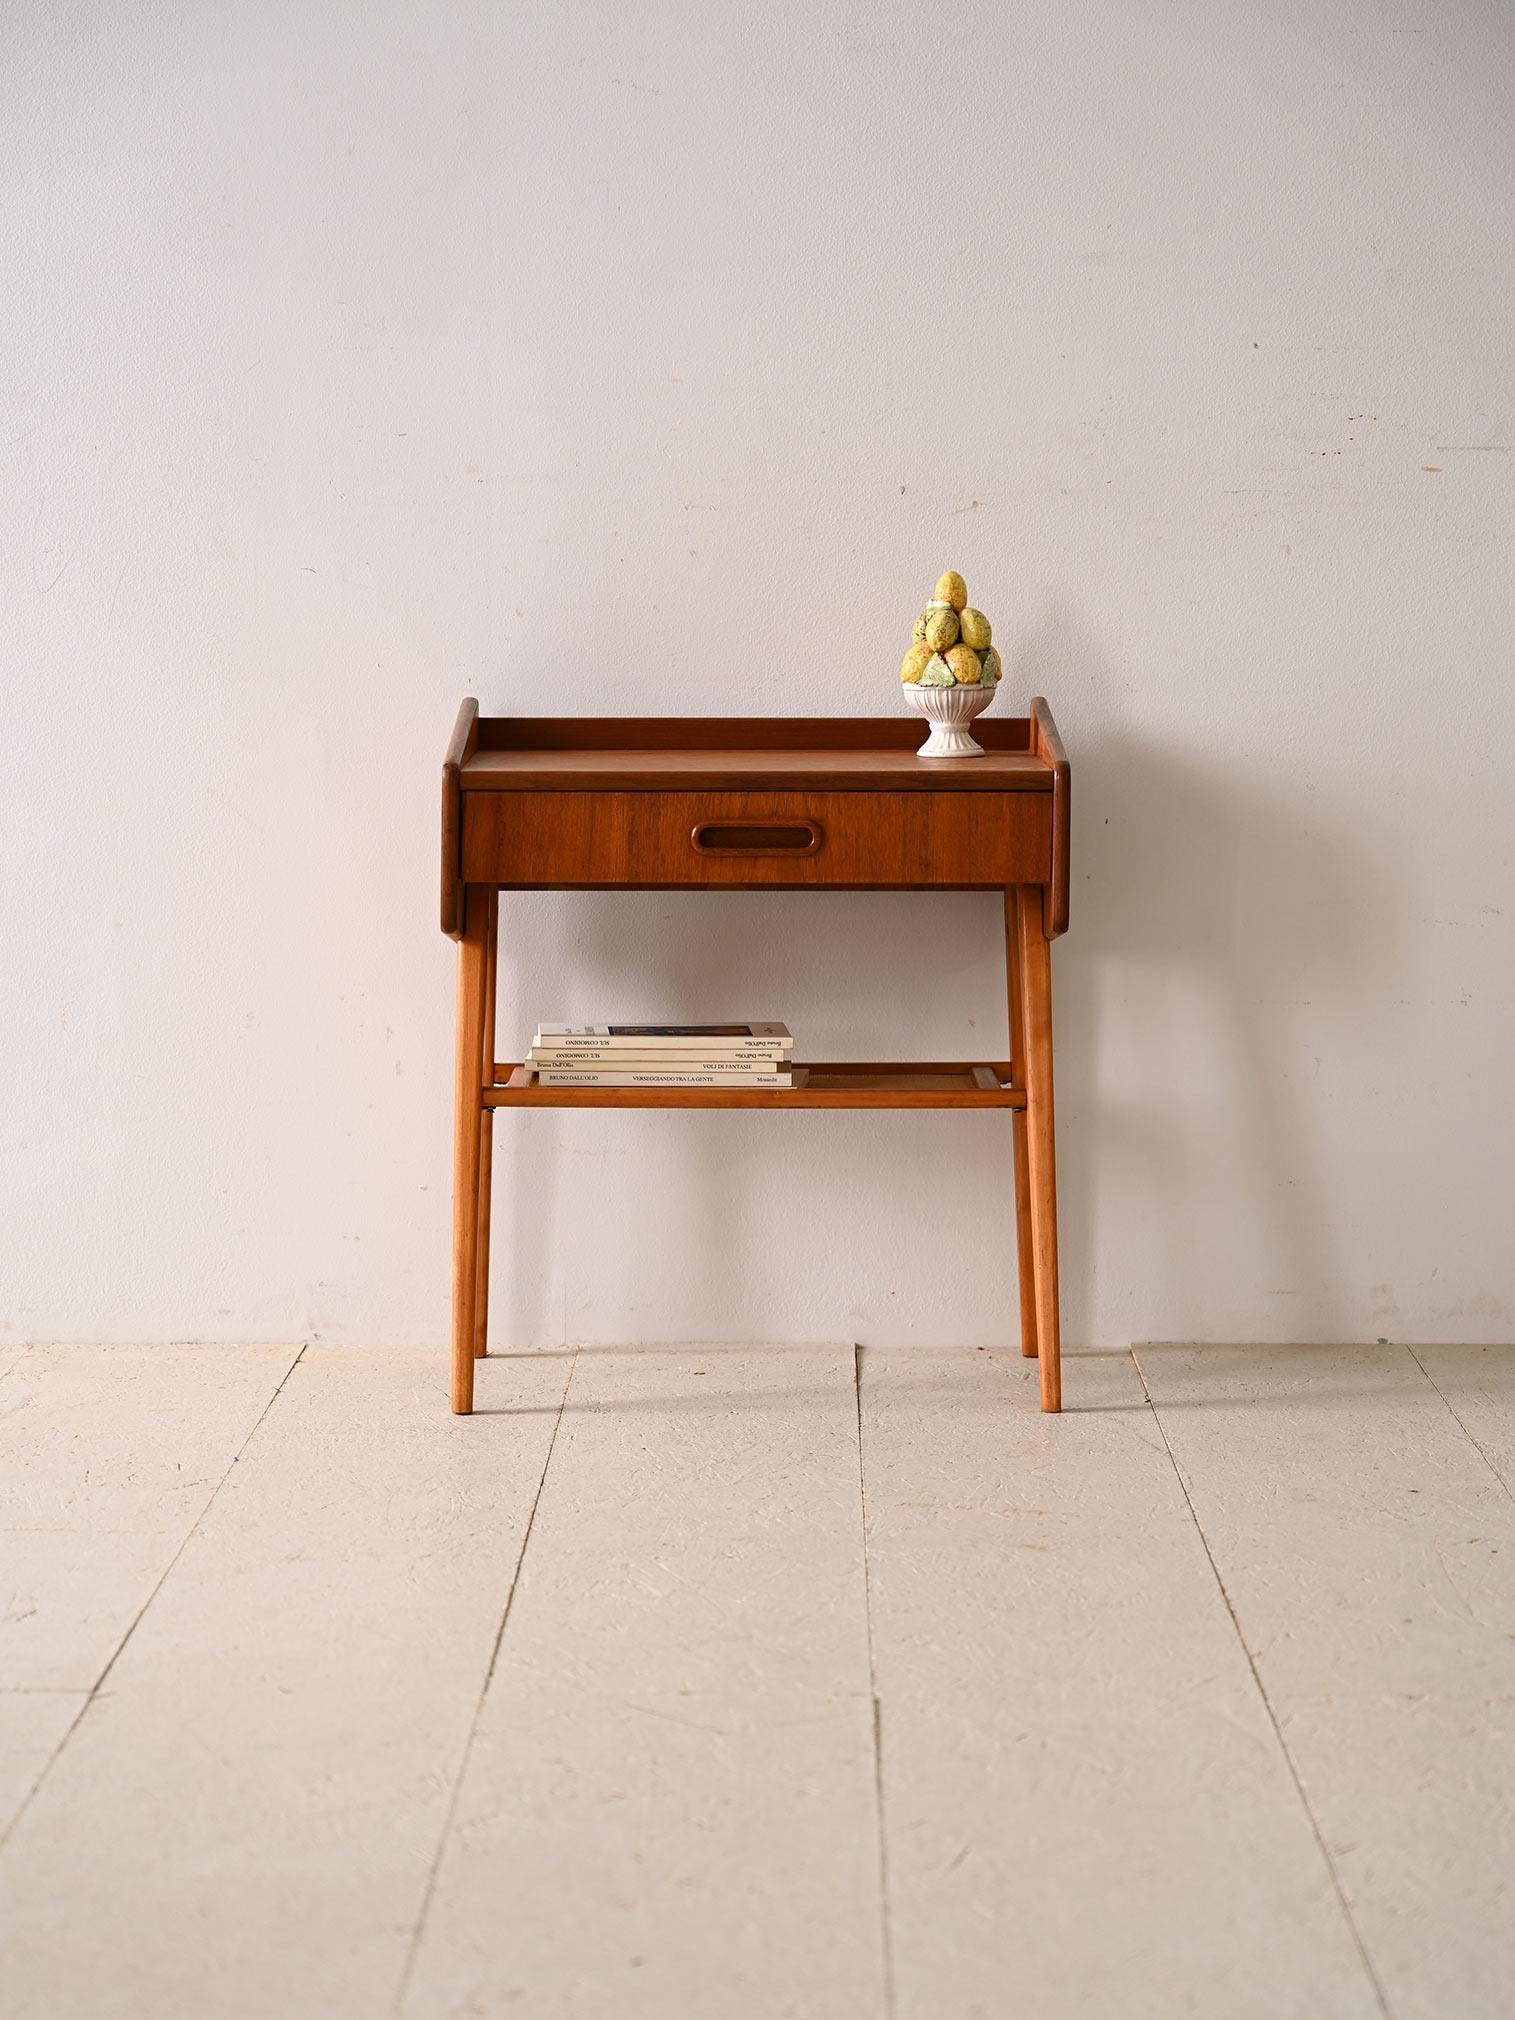 Original vintage nightstand with drawer. Made of fine teak wood, this bedside table embodies the distinctive style of the era with the drawer, equipped with a carved wooden handle, provides space to store small essentials. Slender legs, angled